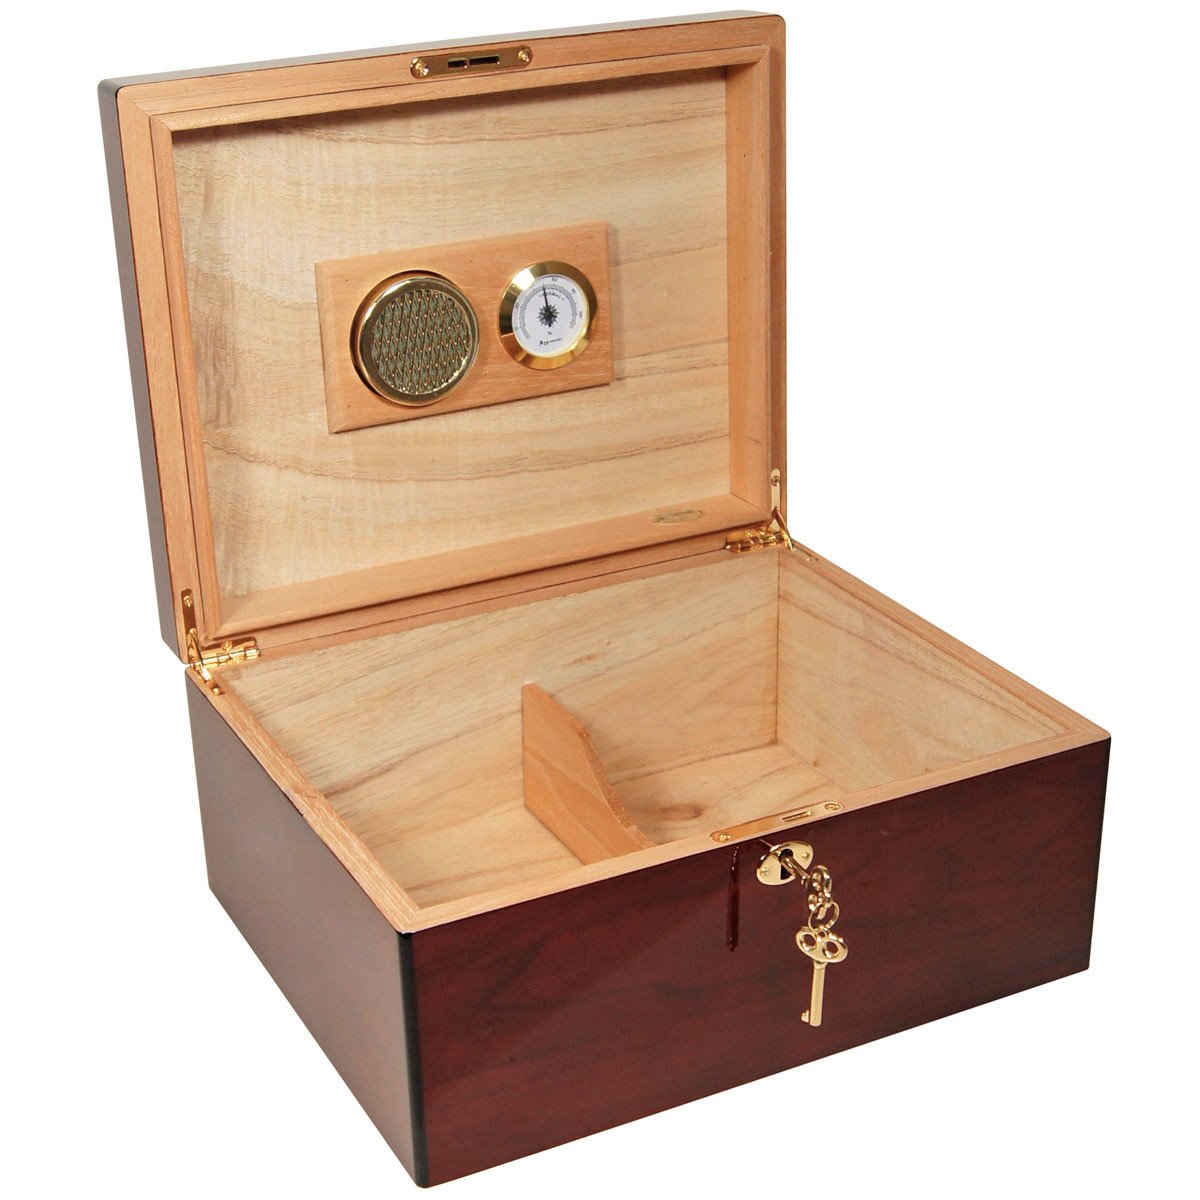 Gift Set Humidor Amor 425 for 75 cigars / Perfect Cutter / Ashtray / Humsol